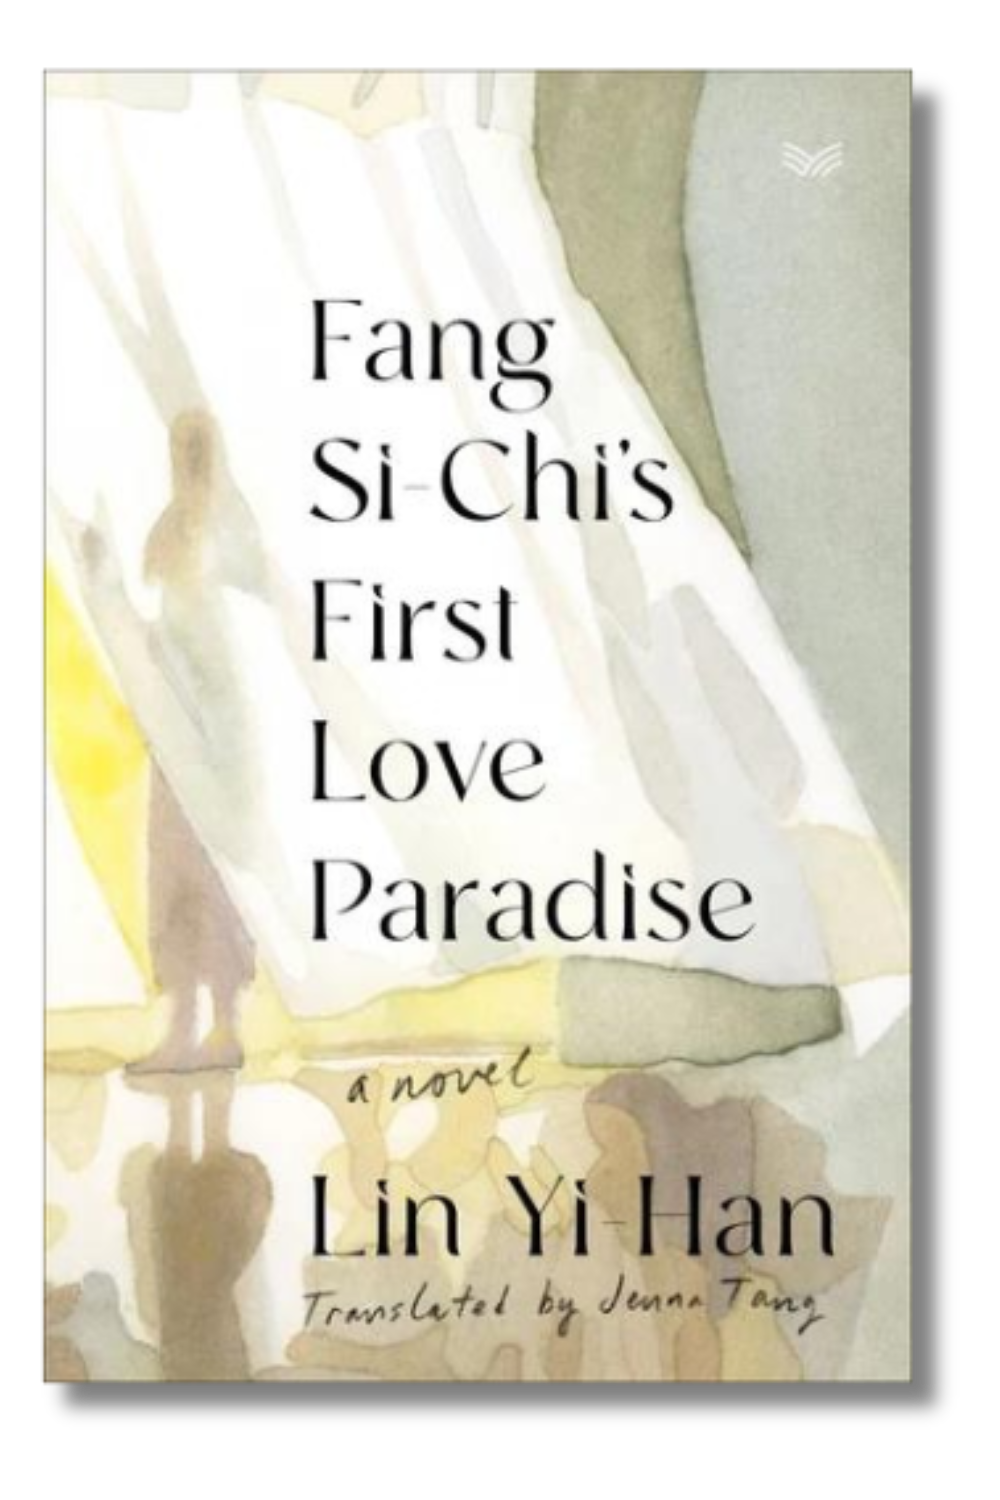 The cover of "Fang Si-Chi's First Love Paradise" by Lin Yi-Han, translated by Jenna Tang